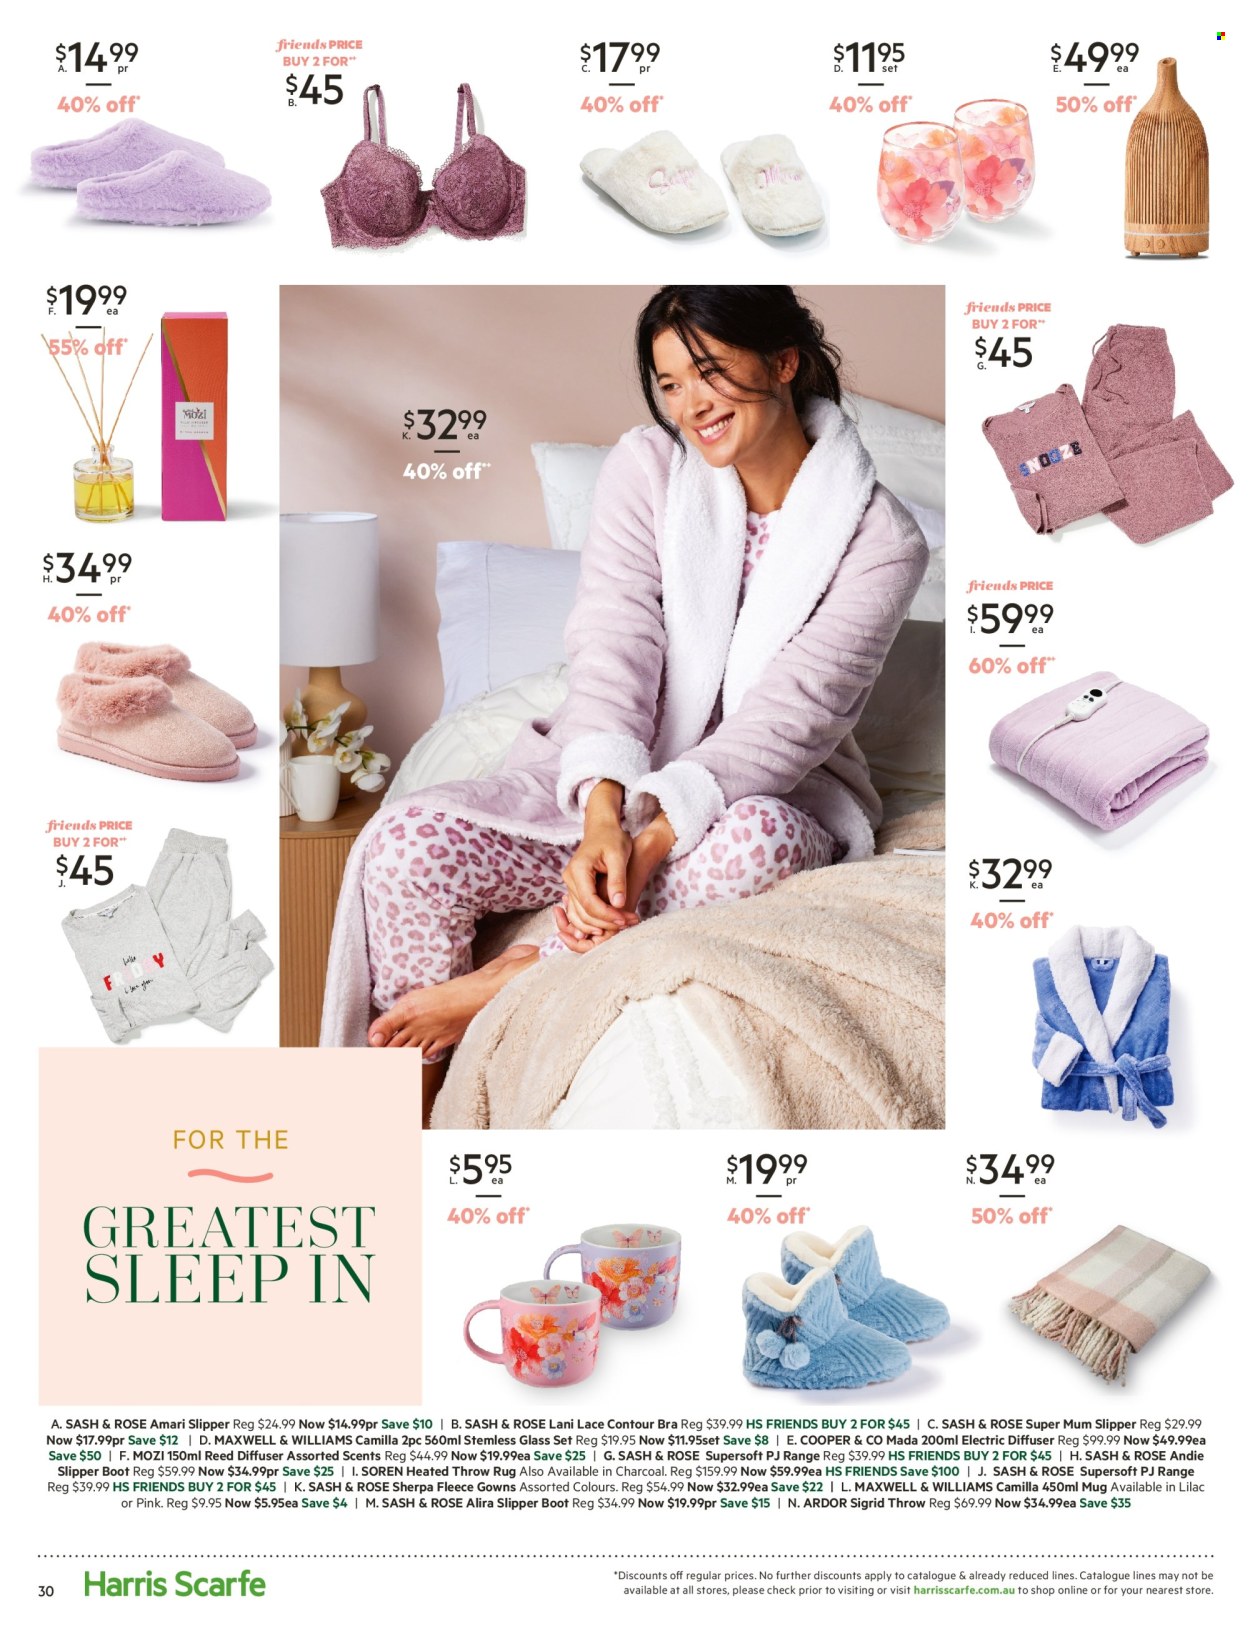 thumbnail - Harris Scarfe Catalogue - Sales products - boots, slippers, mug, diffuser, blanket, heated throw, sherpa, bra. Page 2.